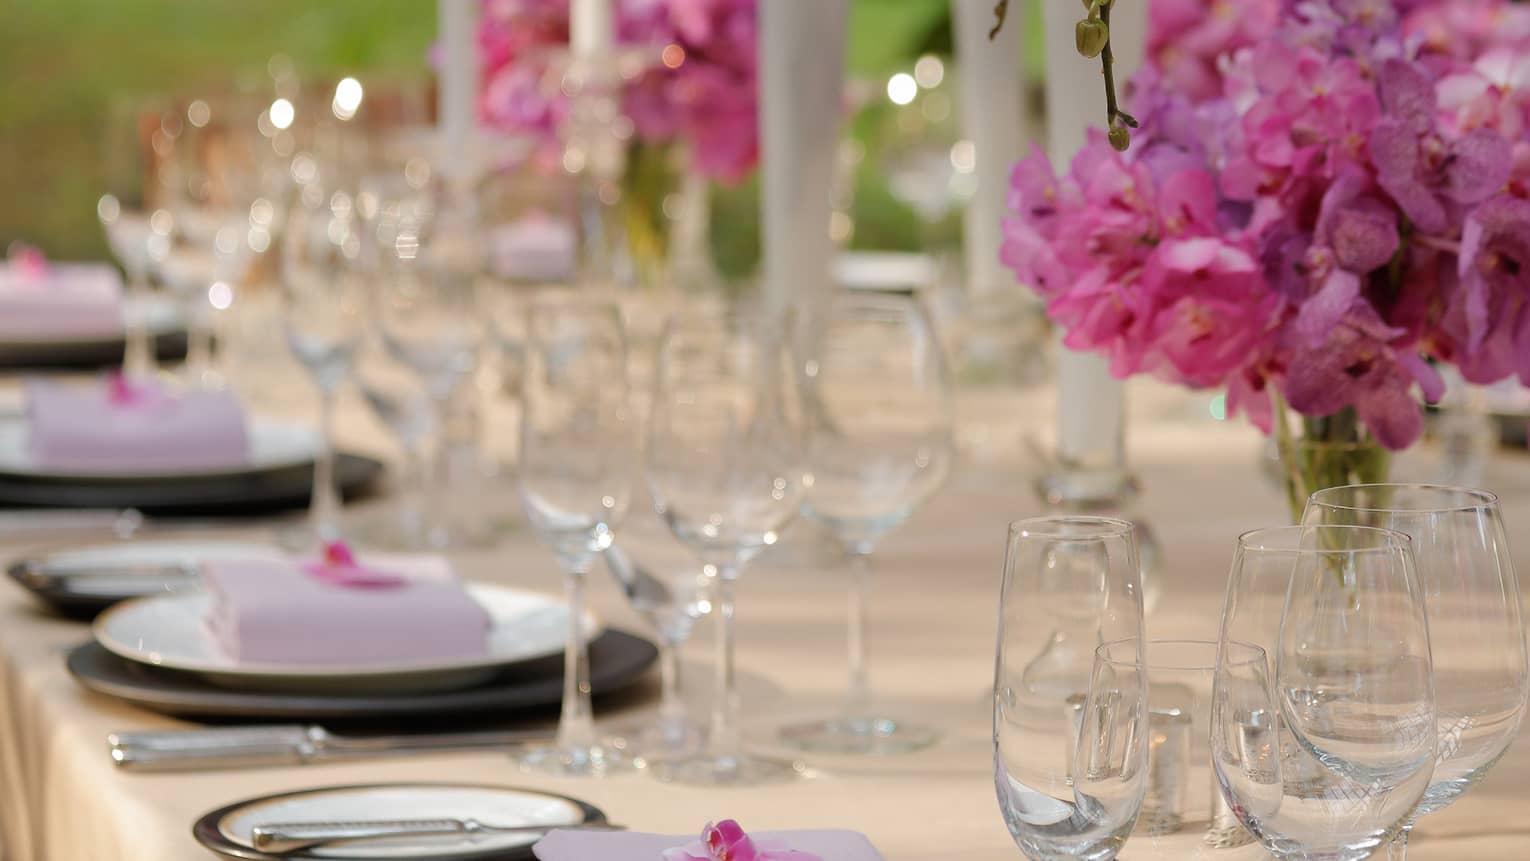 Outdoor dining table with pink flowers in vases, tall white candles 